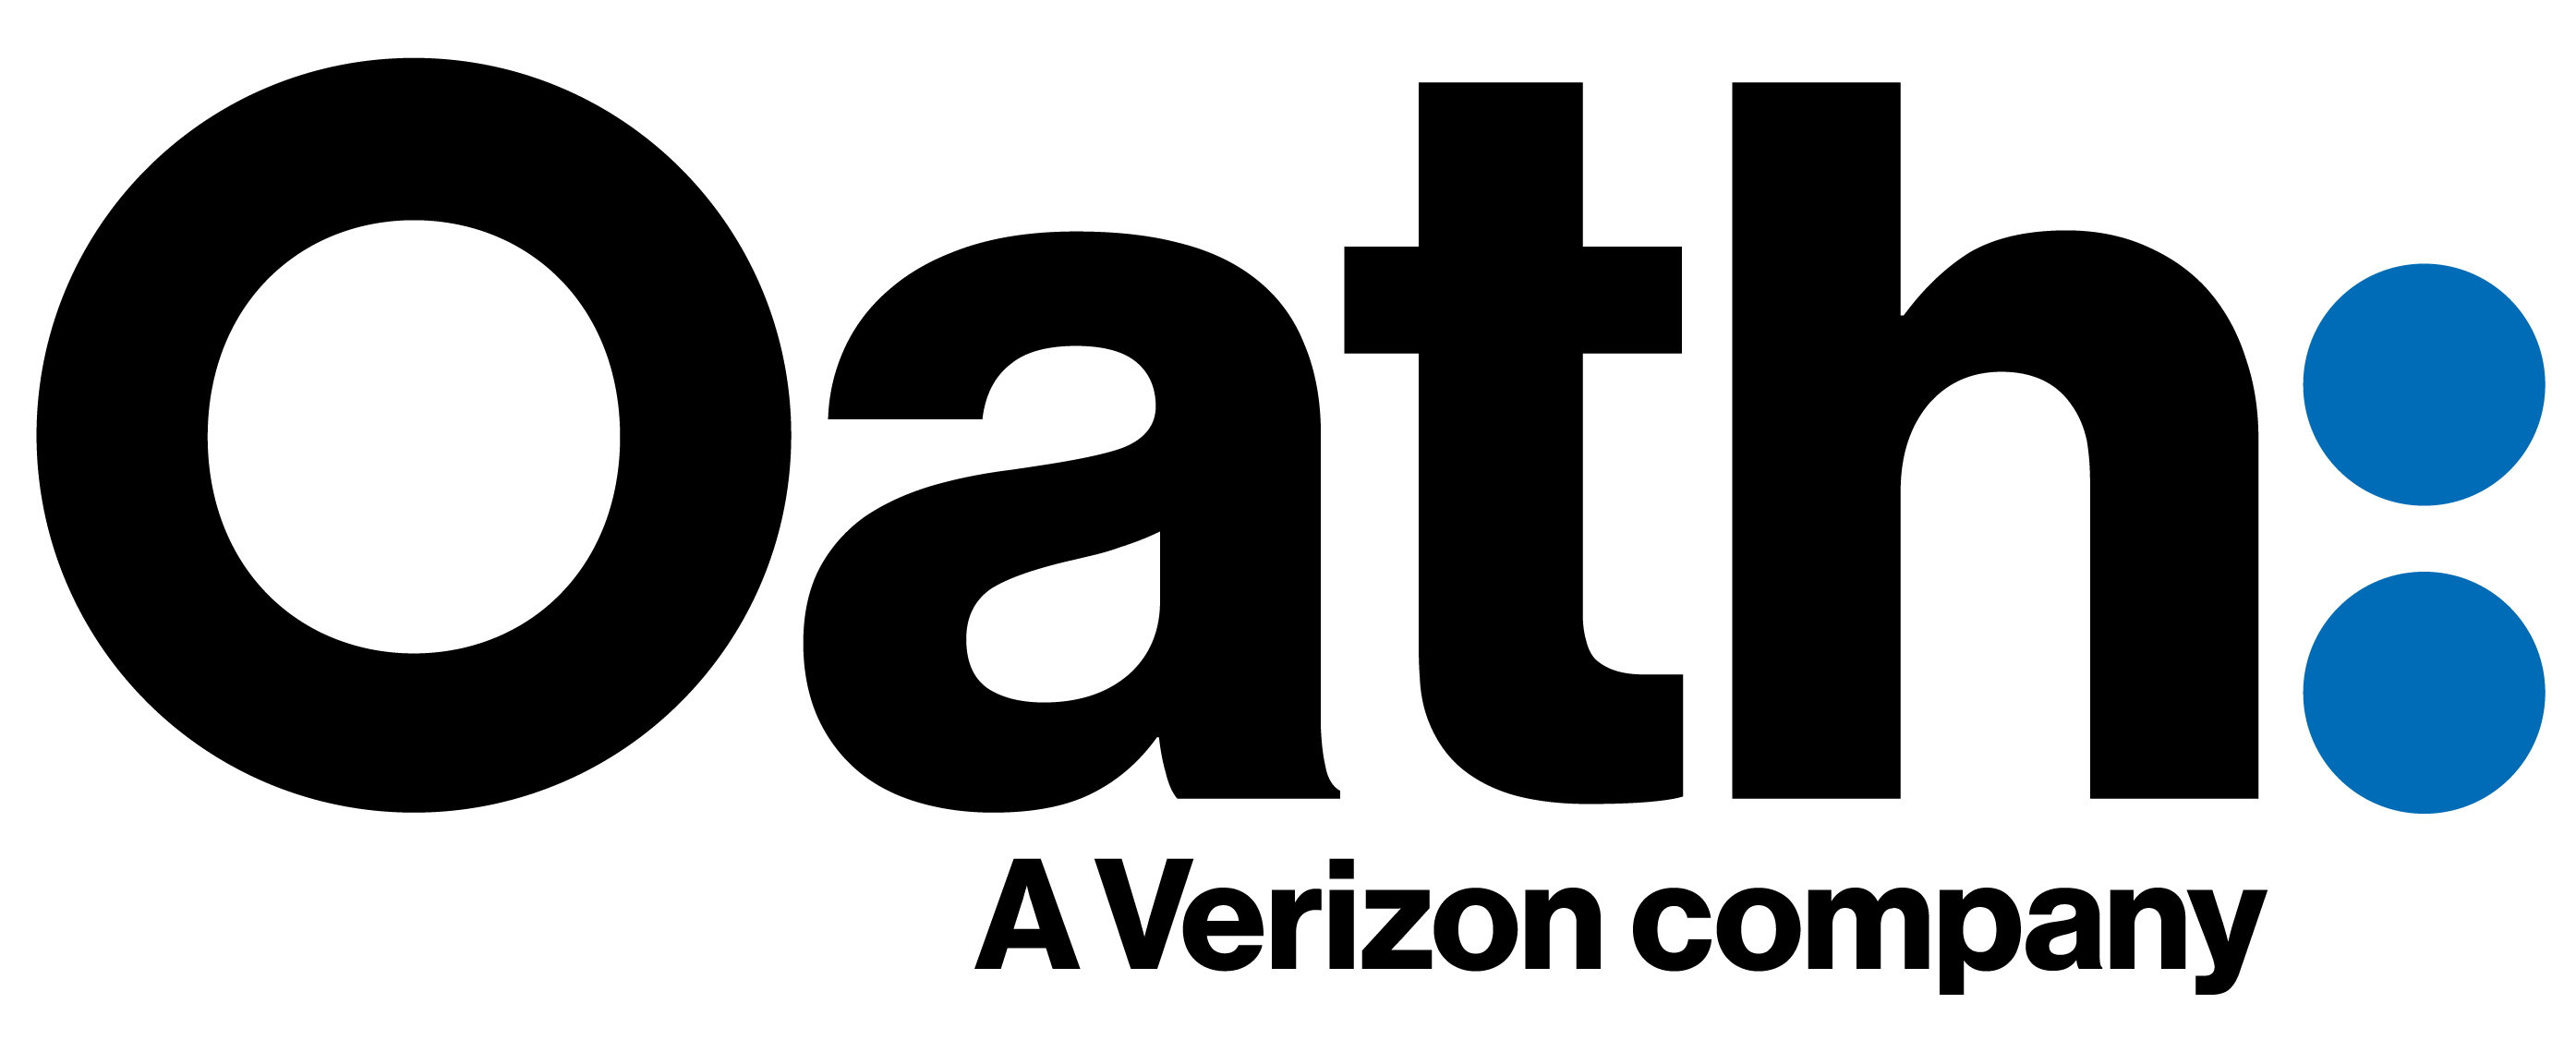 Verizon Digital Media Services Helps Tennis Channel Stream More Than 2,000 Live and VOD Matches in 2018 Business Wire